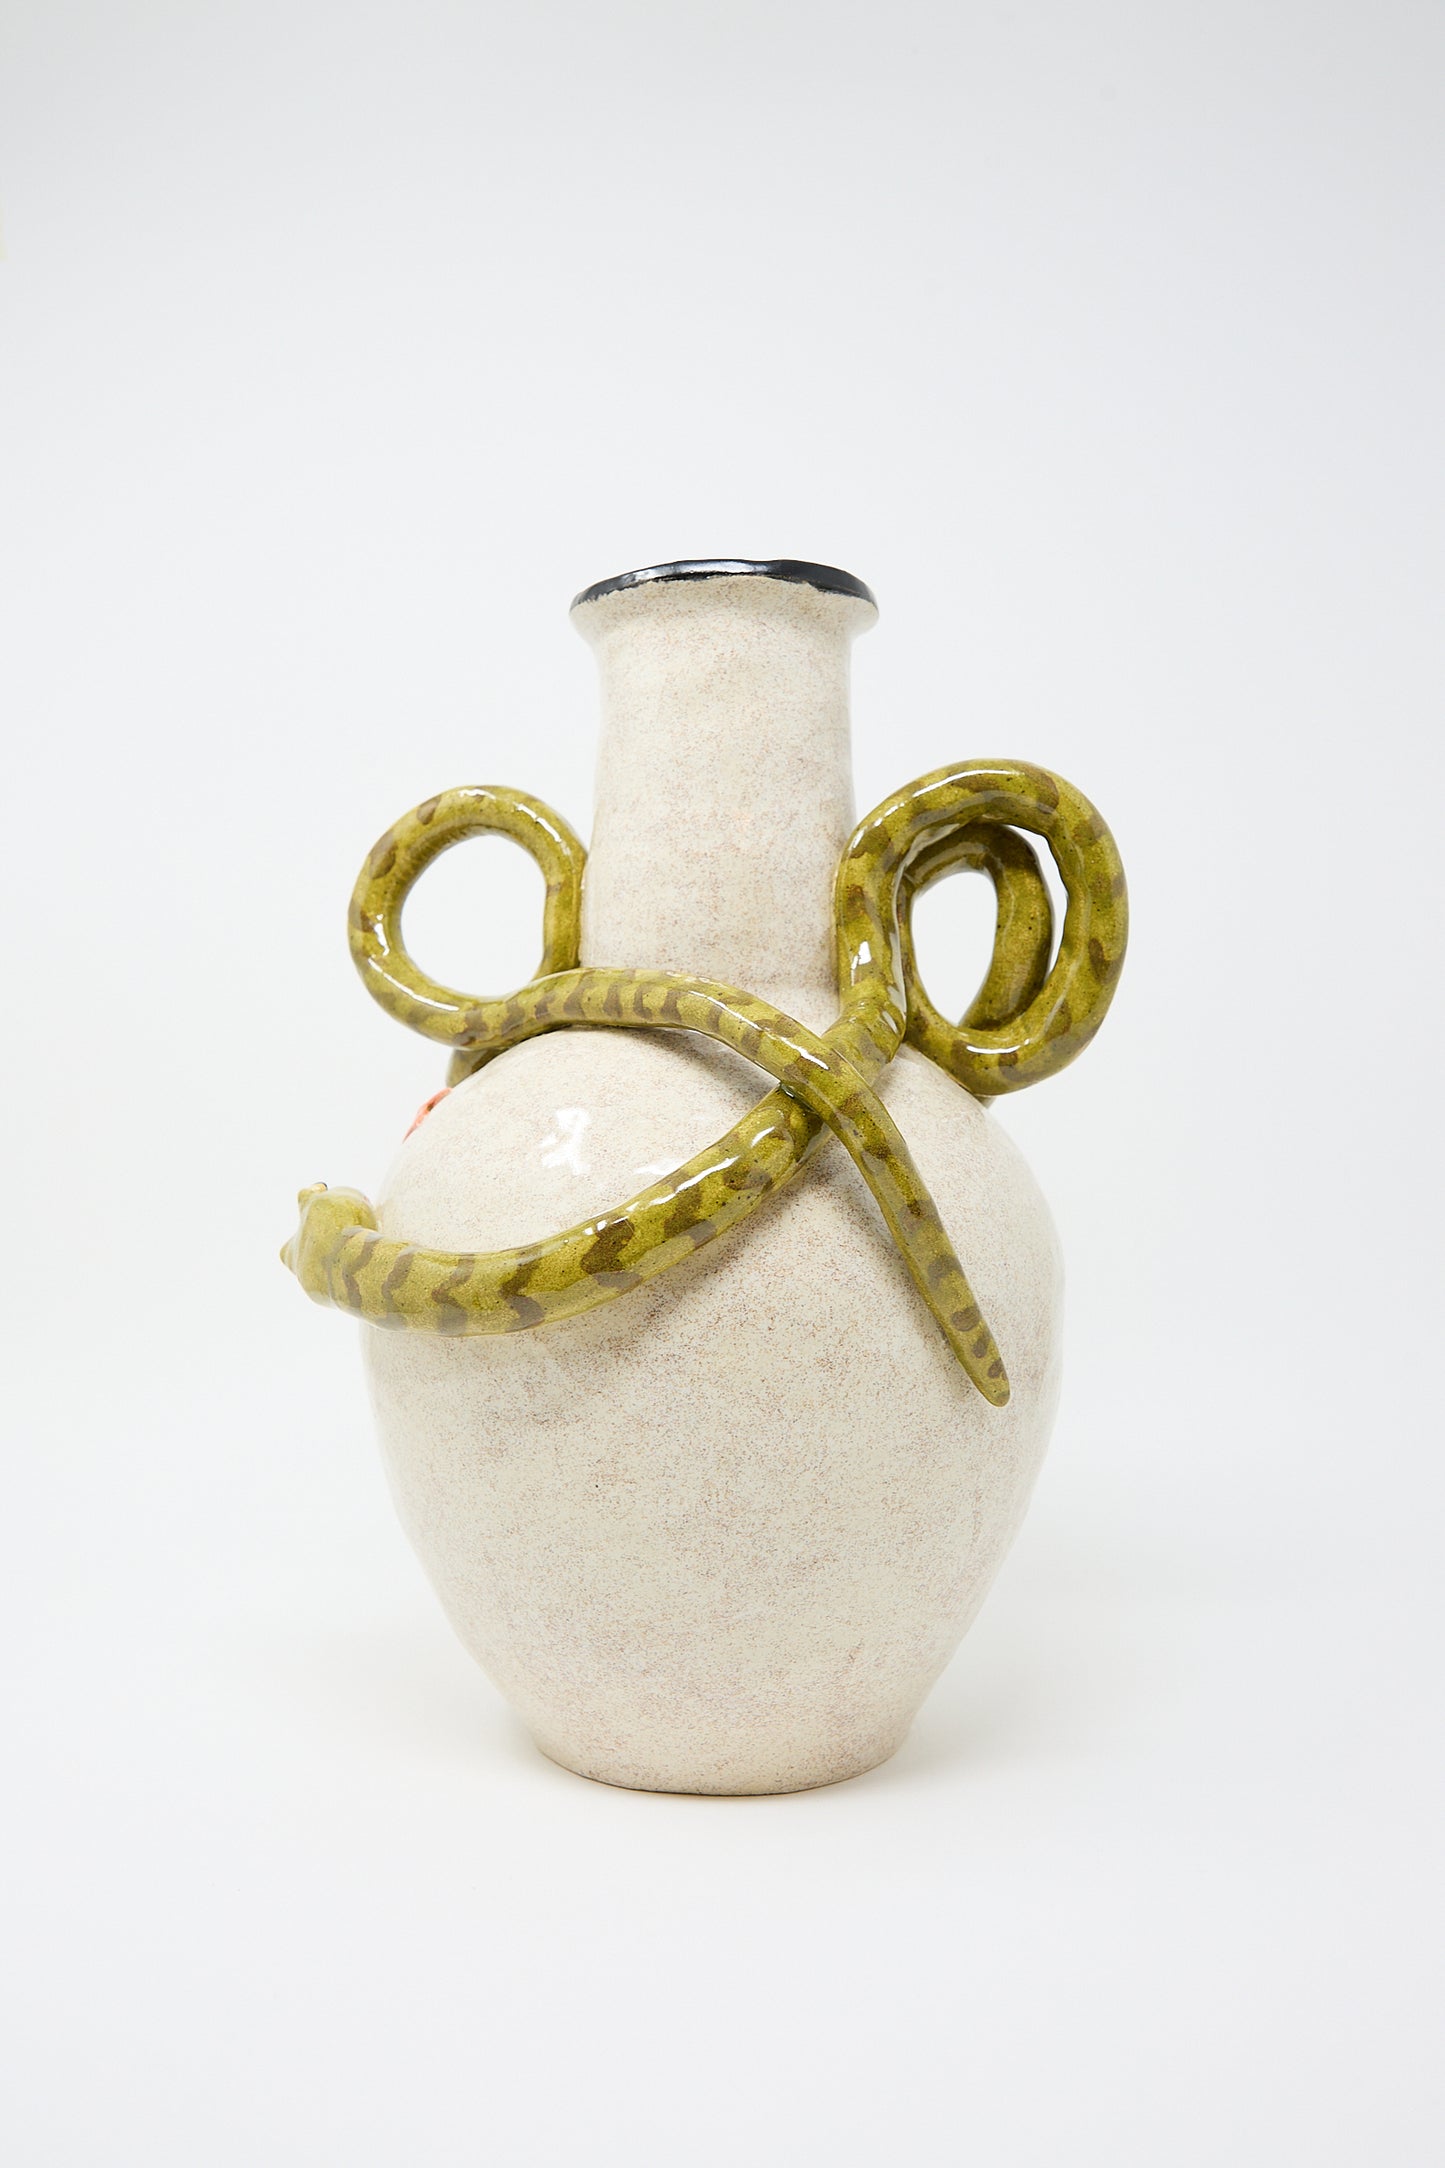 Snake Amphora Vase with a unique design featuring two intertwined green handles on a plain white background, crafted as part of the decorative arts ceramics collection by Pearce Williams.